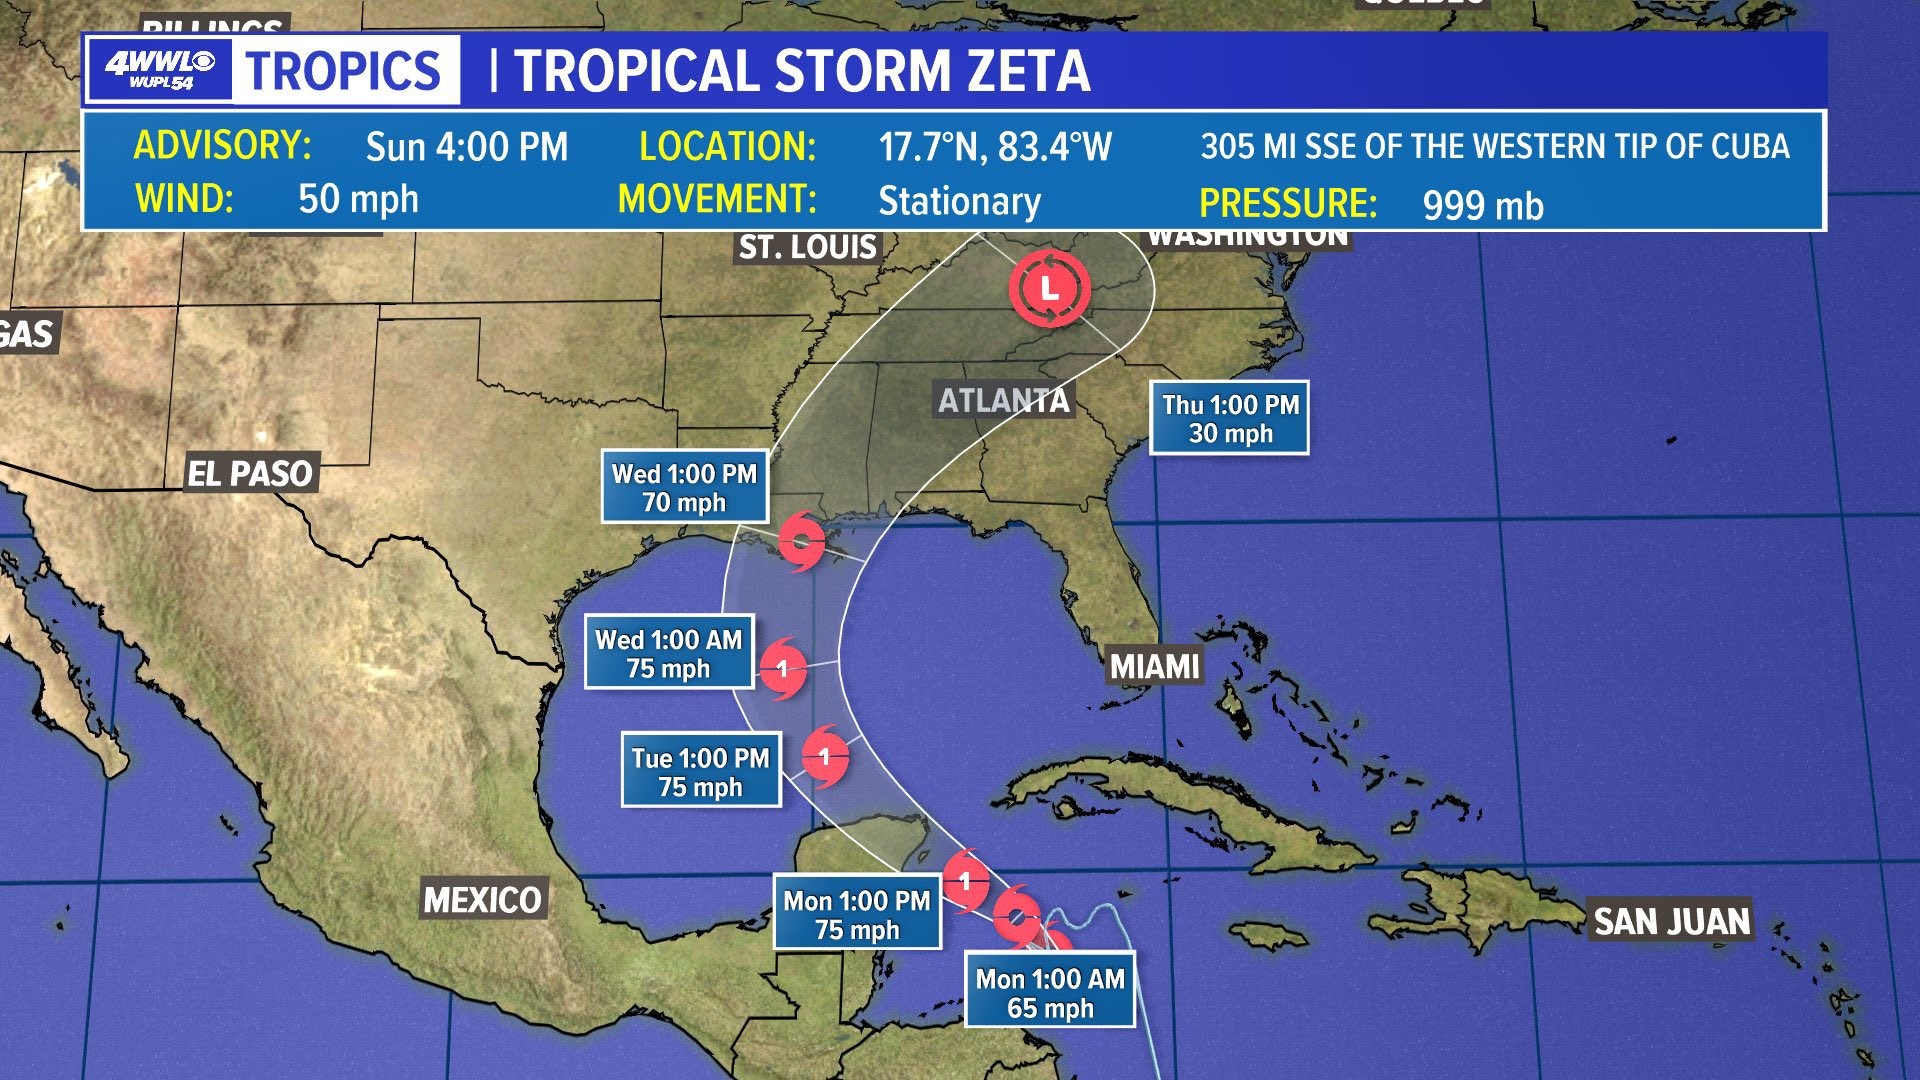 Weather Expert Alexandra Cranford is highlighting the path Tropical Storm Zeta could take once it reaches land.